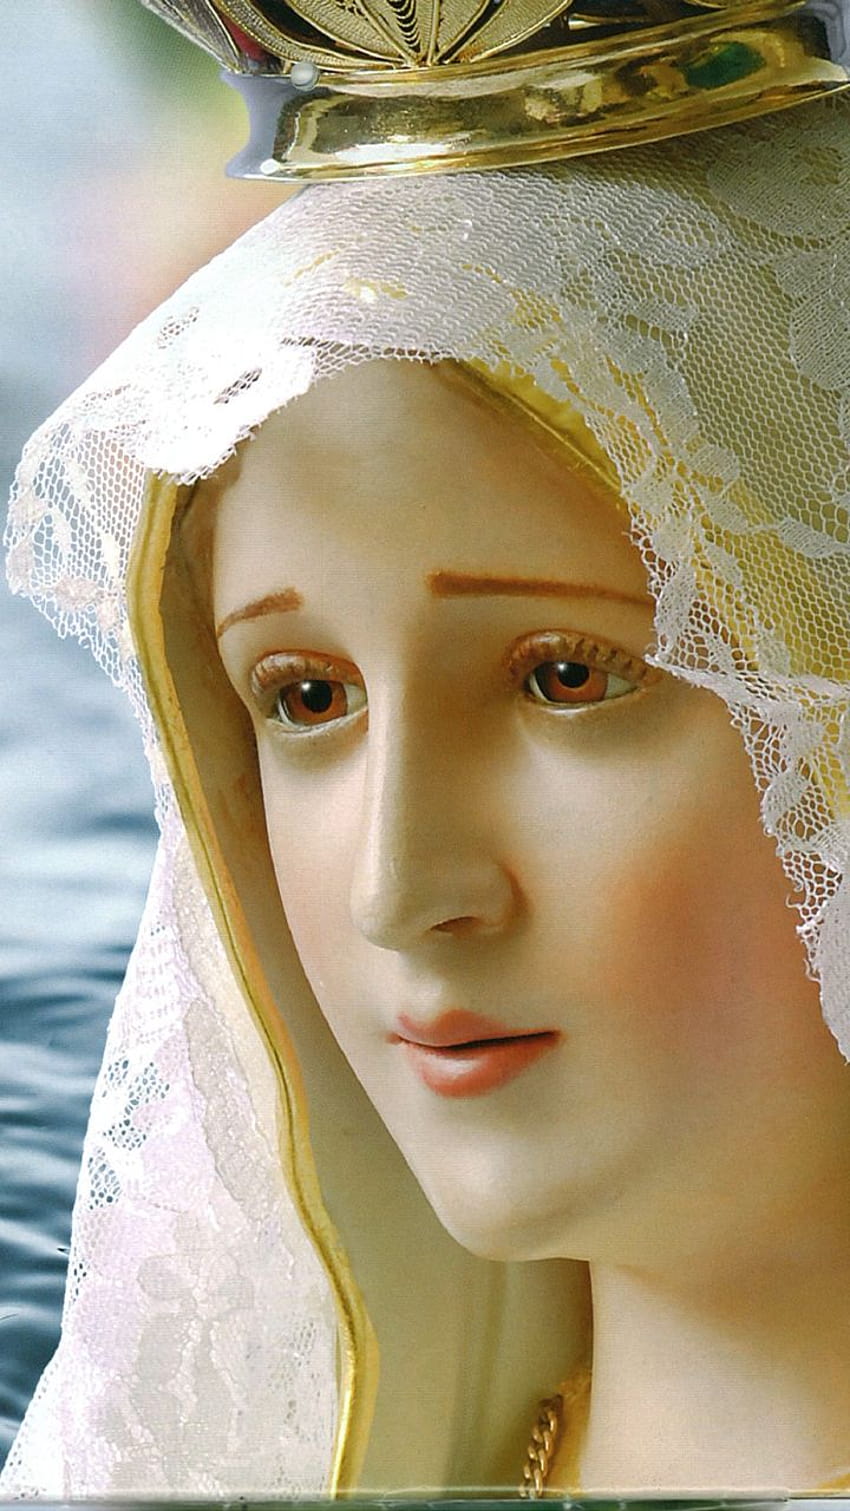 Mother Mary - God HD Wallpapers